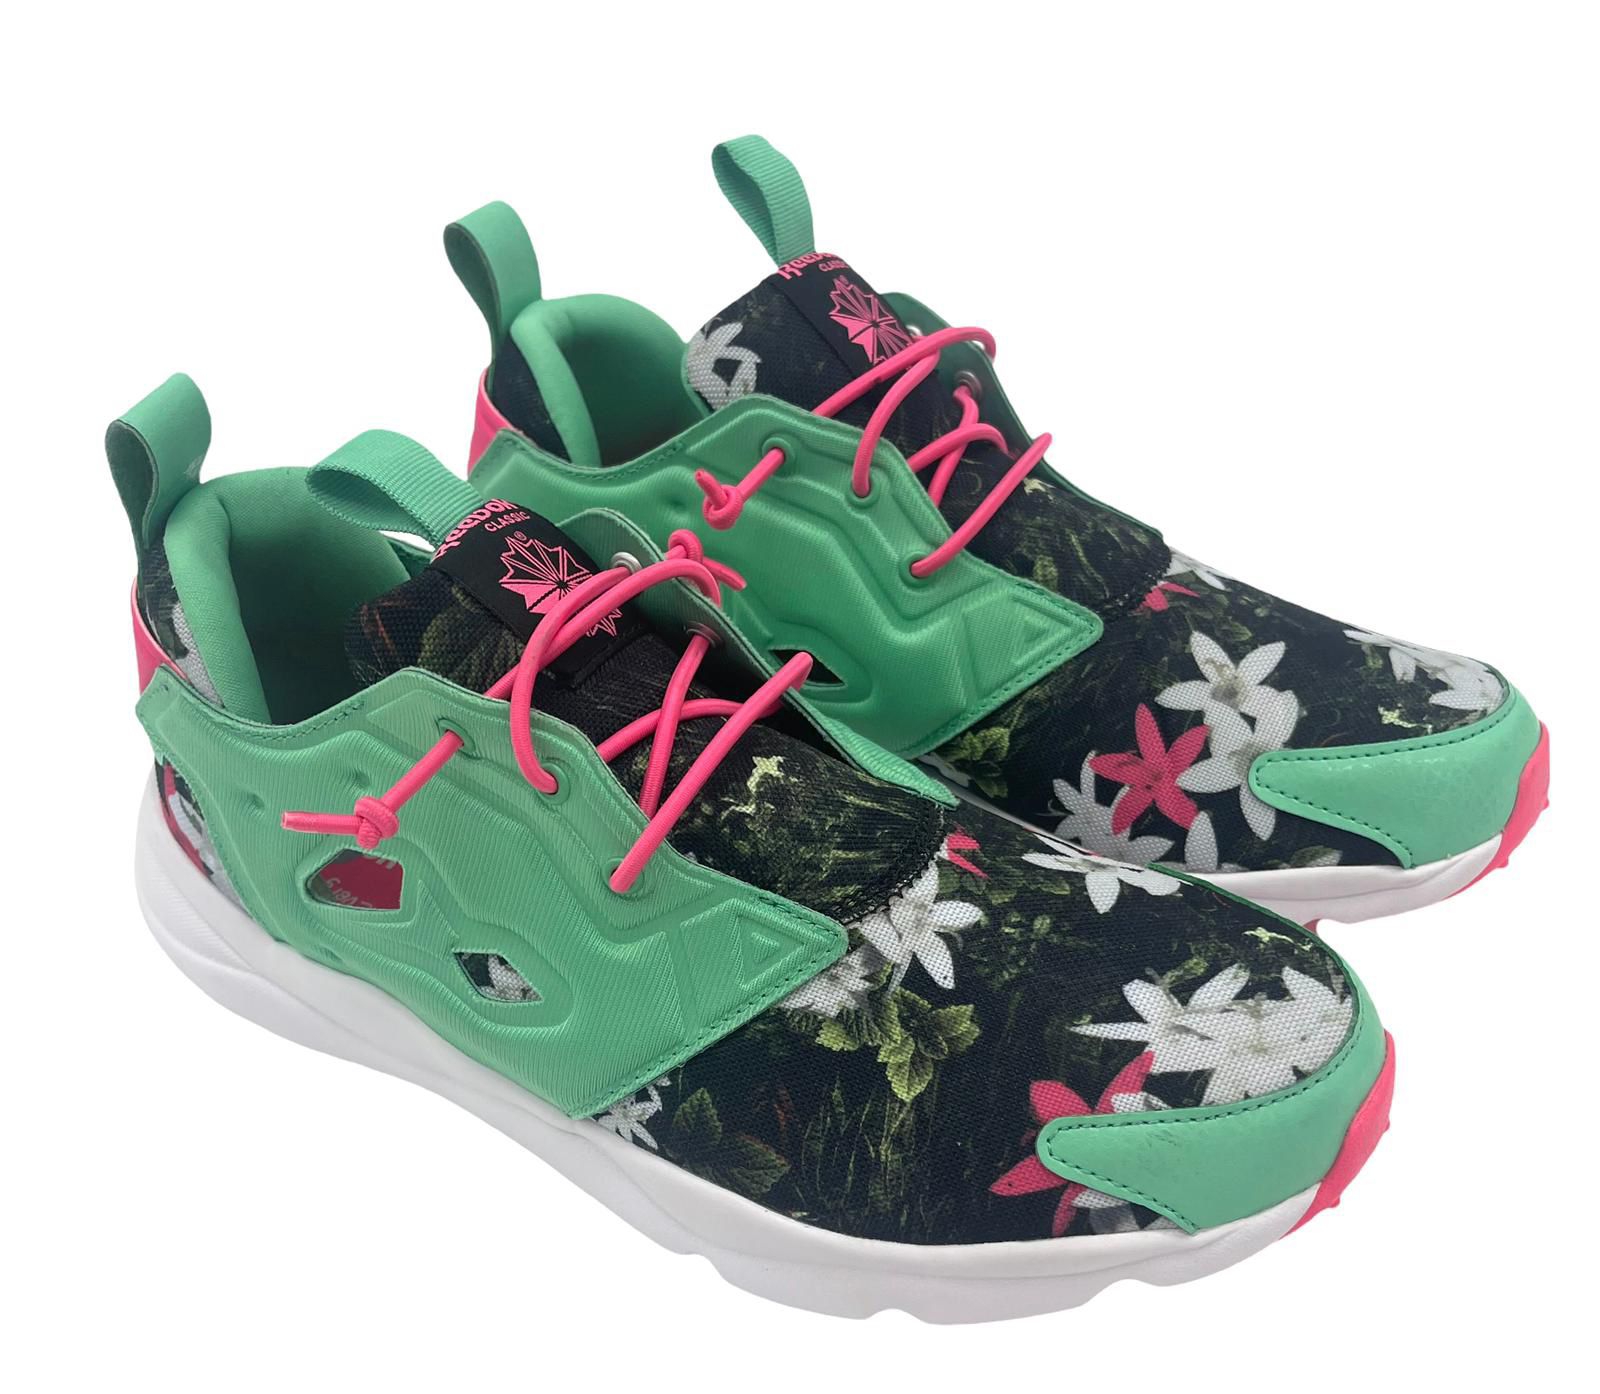 Reebok Graphic FLoral And Pink Woman's Shoes US Size 7 for in Henderson, - OfferUp